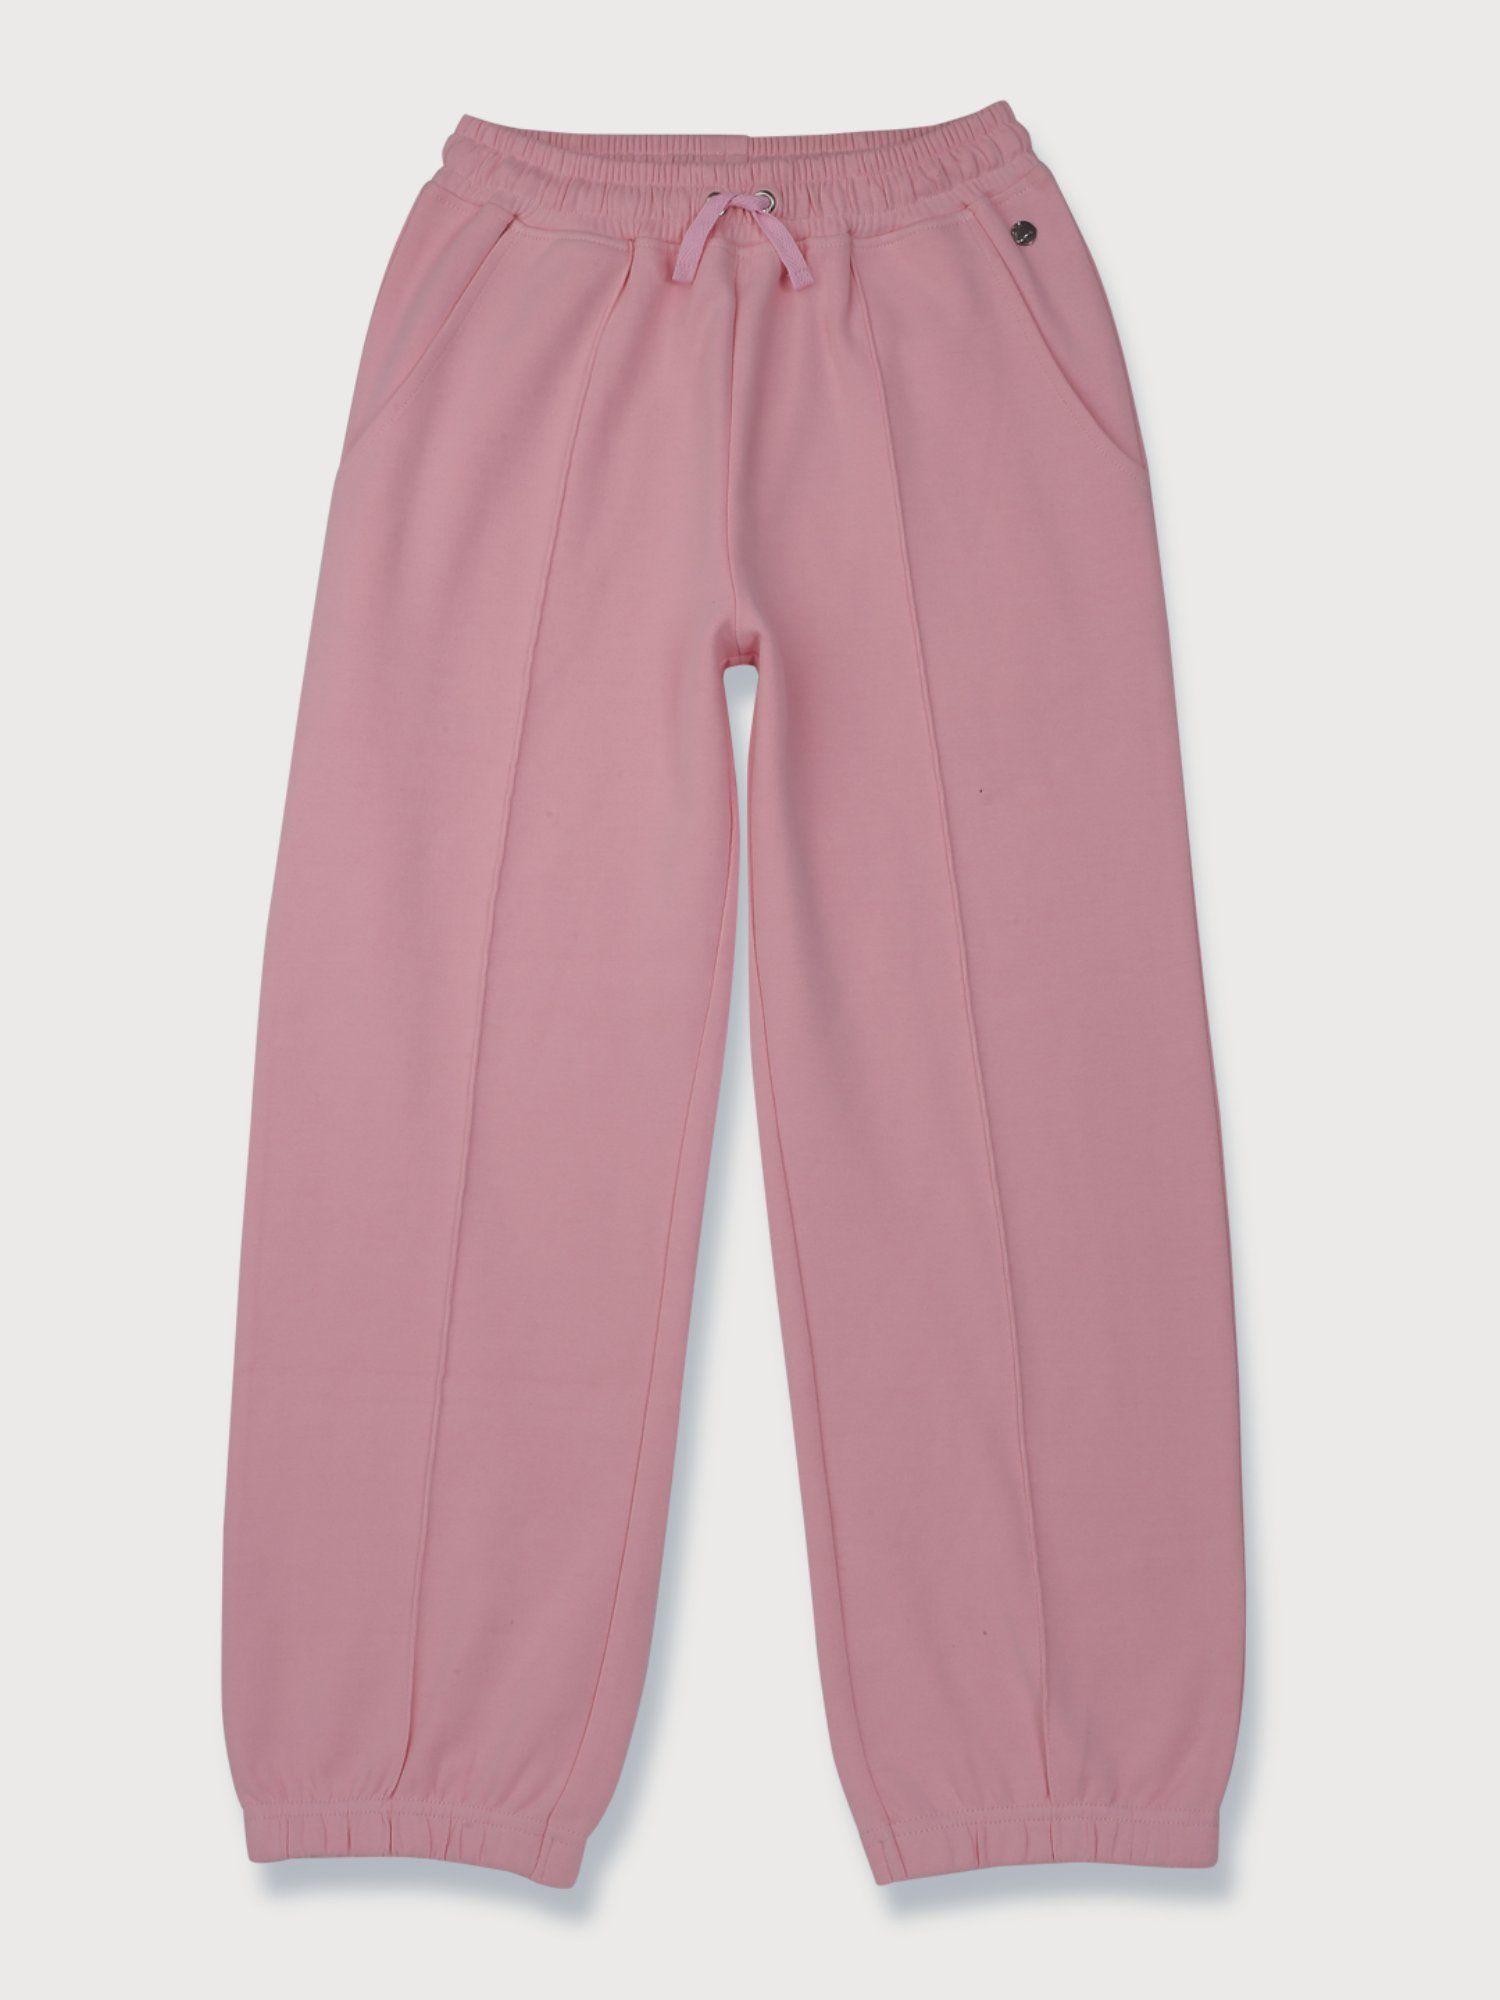 girls pink solid cotton track pants